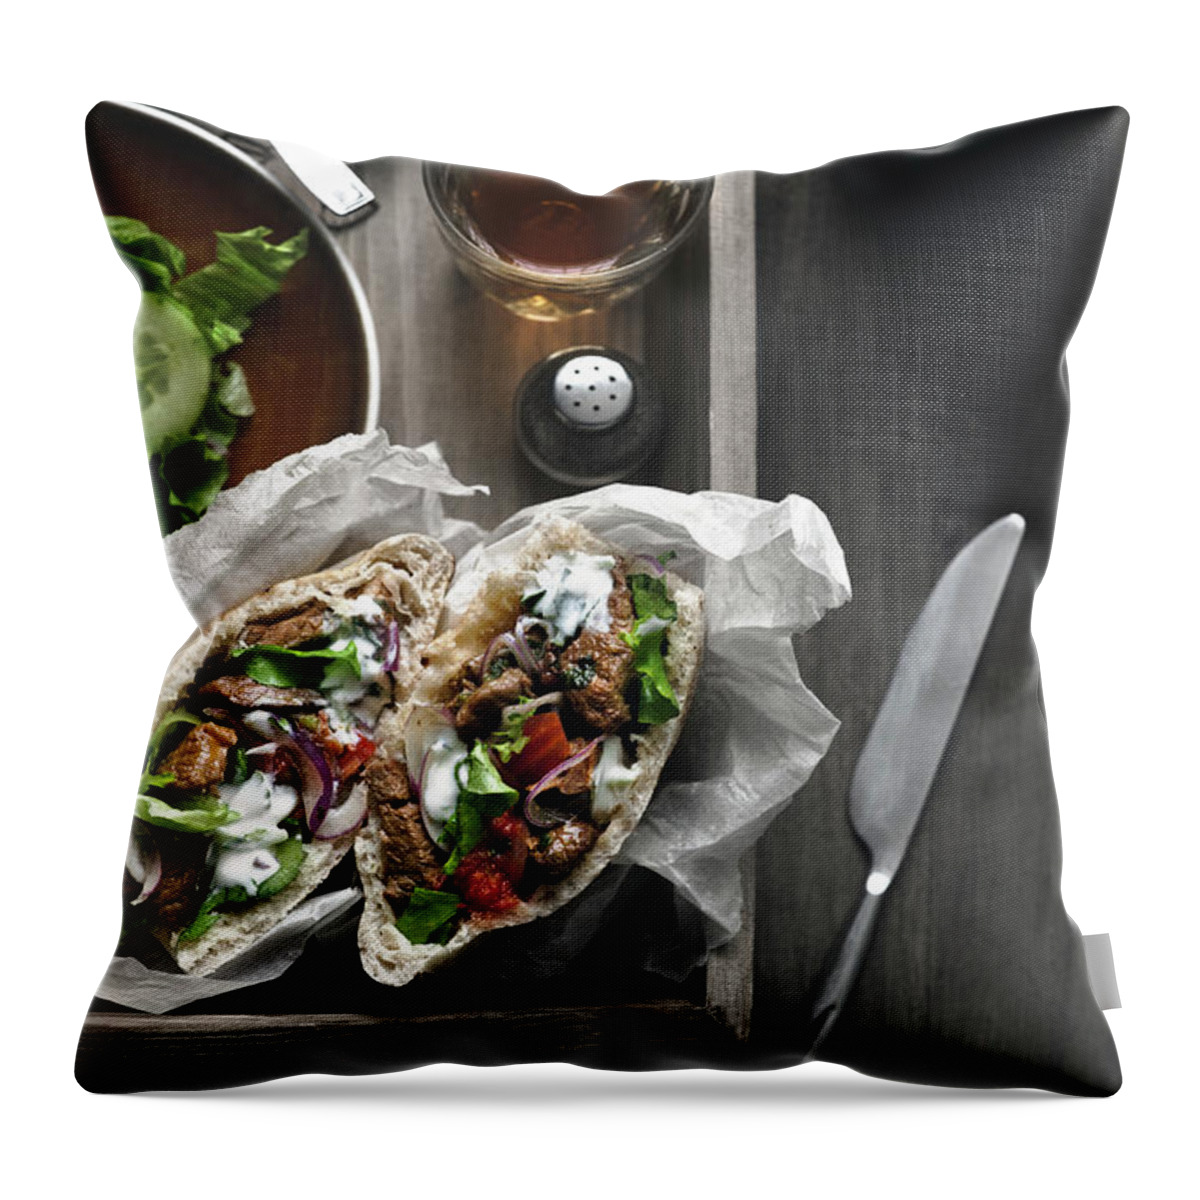 Gstaad Throw Pillow featuring the photograph Doner Kebabs by A.y. Photography